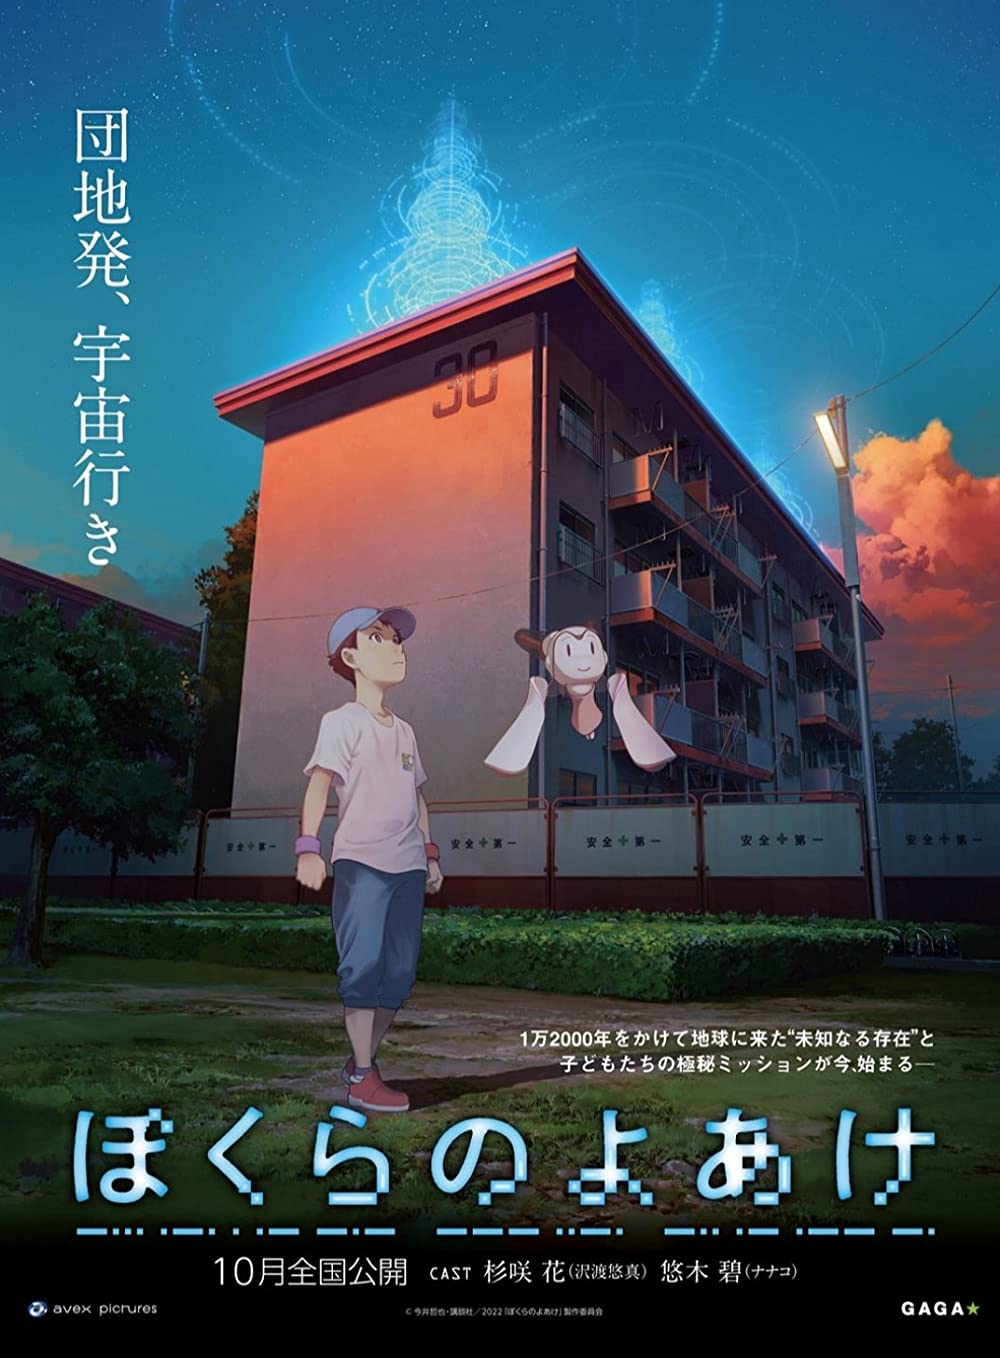 Break of Dawn Anime Film Releases Official Two-Minute Clip